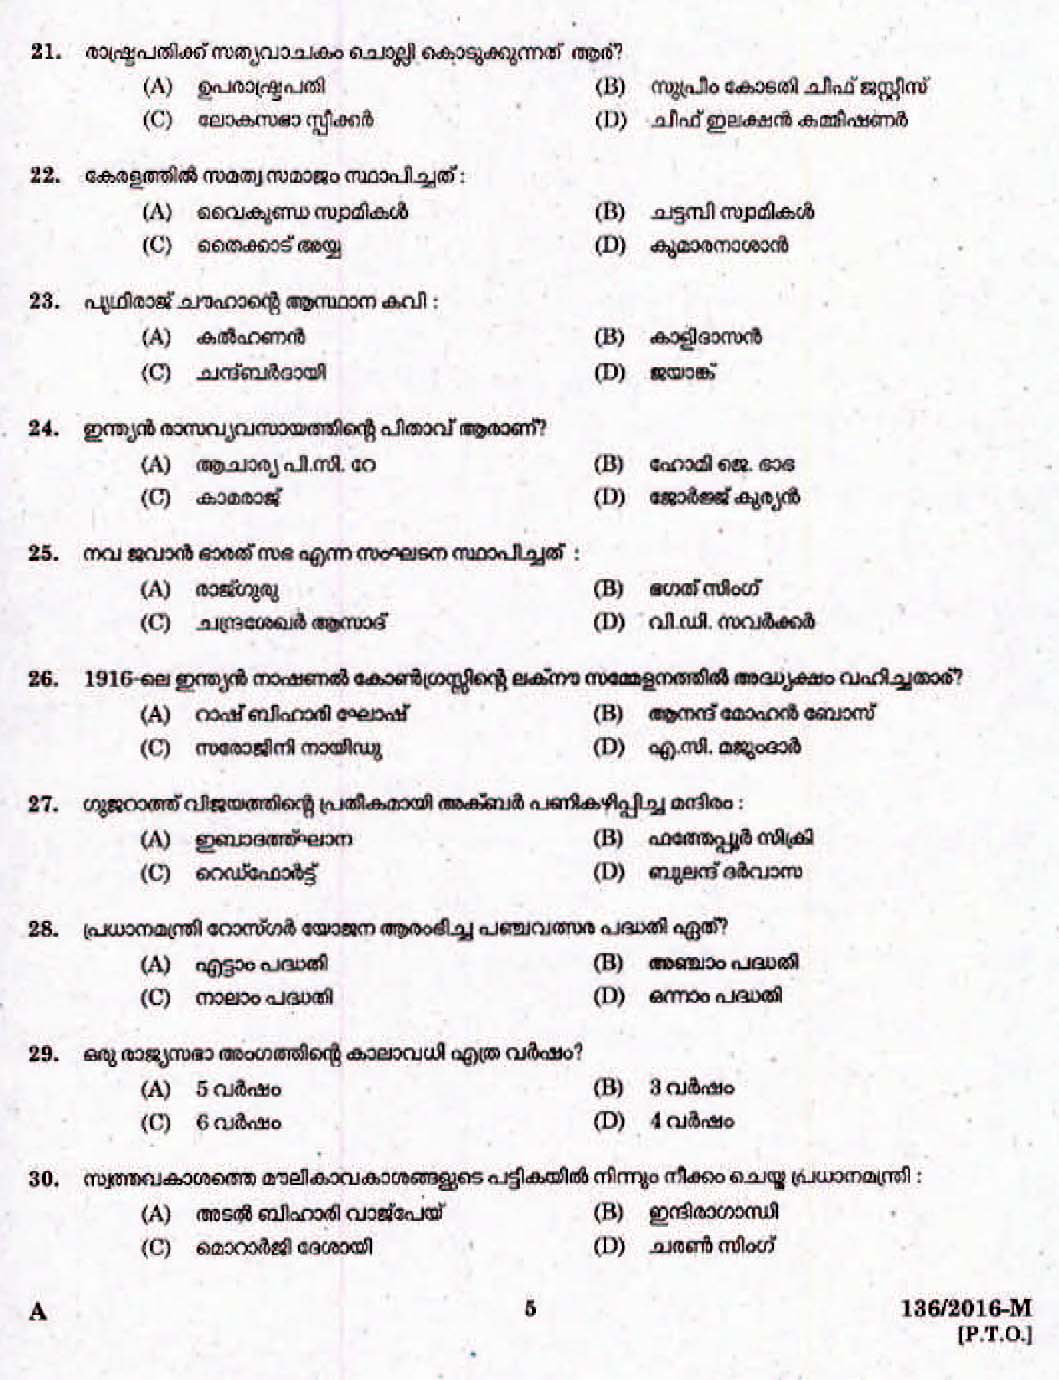 LD Clerk Question Paper Malayalam 2016 Paper Code 1362016 M 3